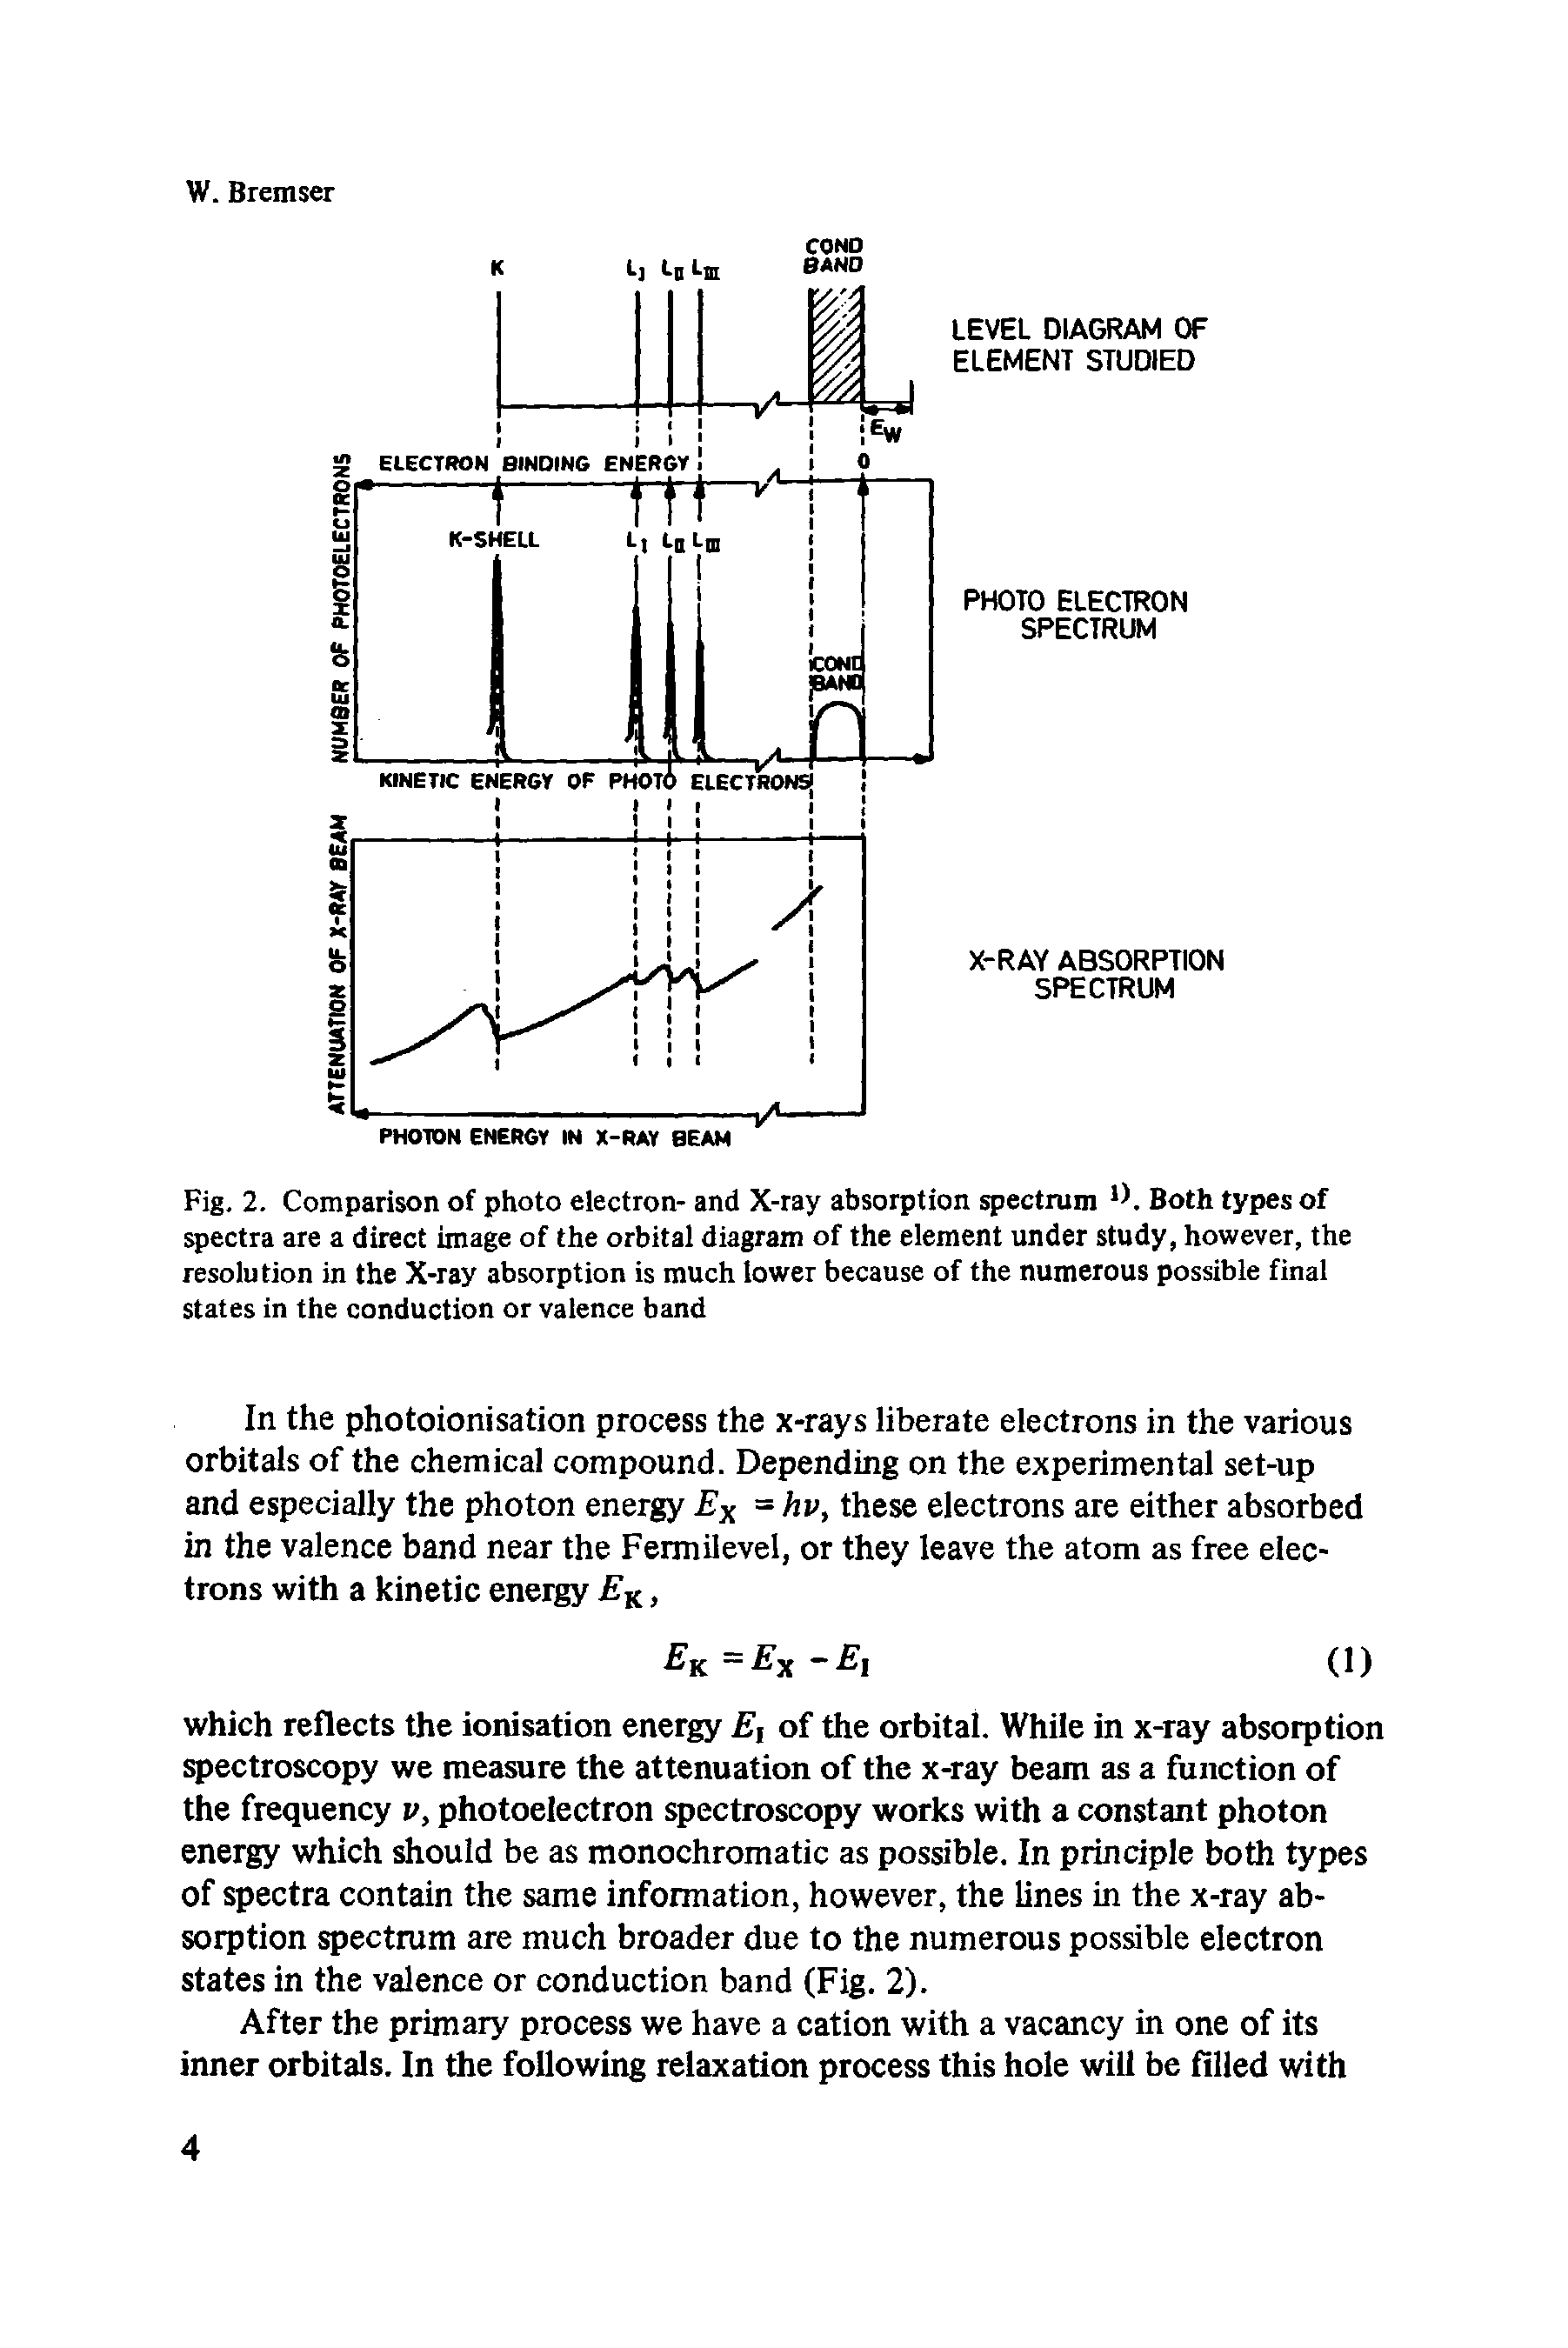 Fig. 2. Comparison of photo electron- and X-ray absorption spectrum 1. Both types of spectra are a direct image of the orbital diagram of the element under study, however, the resolution in the X-ray absorption is much lower because of the numerous possible final states in the conduction or valence band...